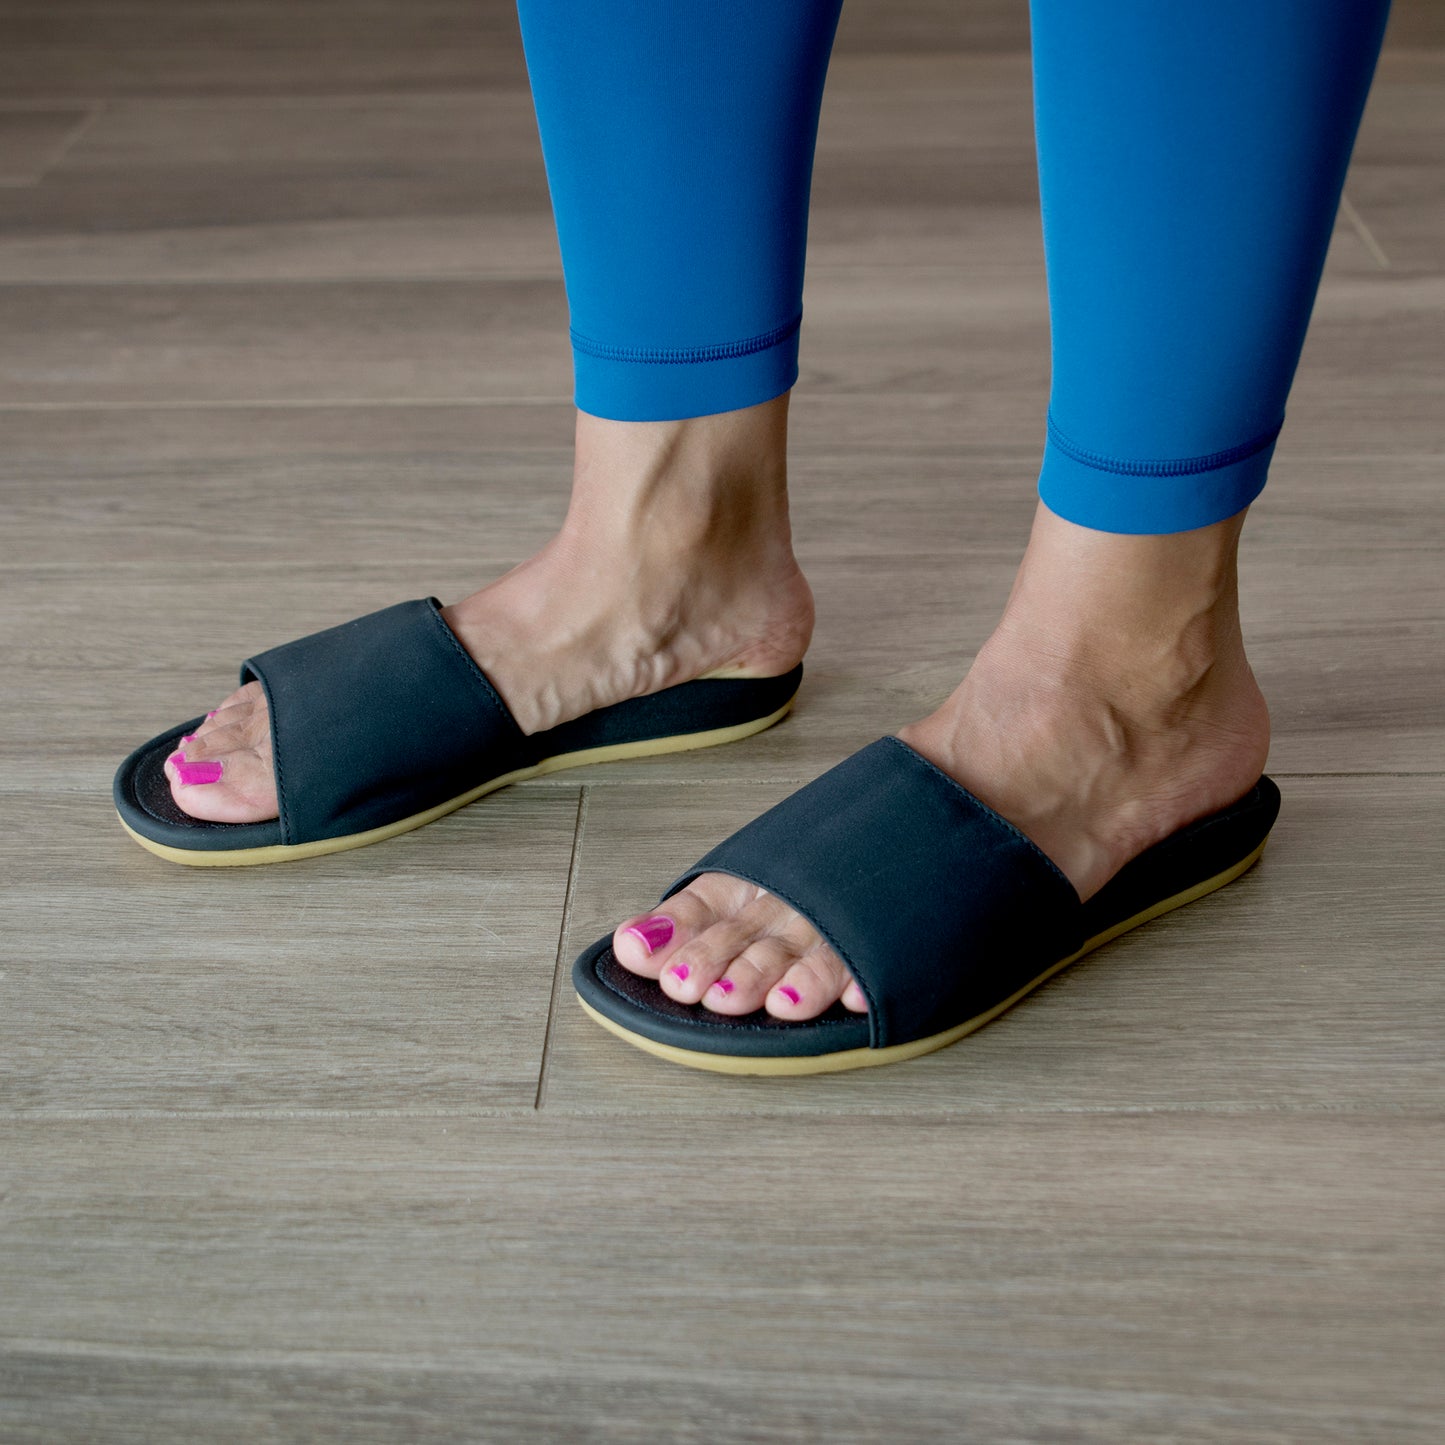 Yoga Sandals Made with OmFoam CUSH - Alerse